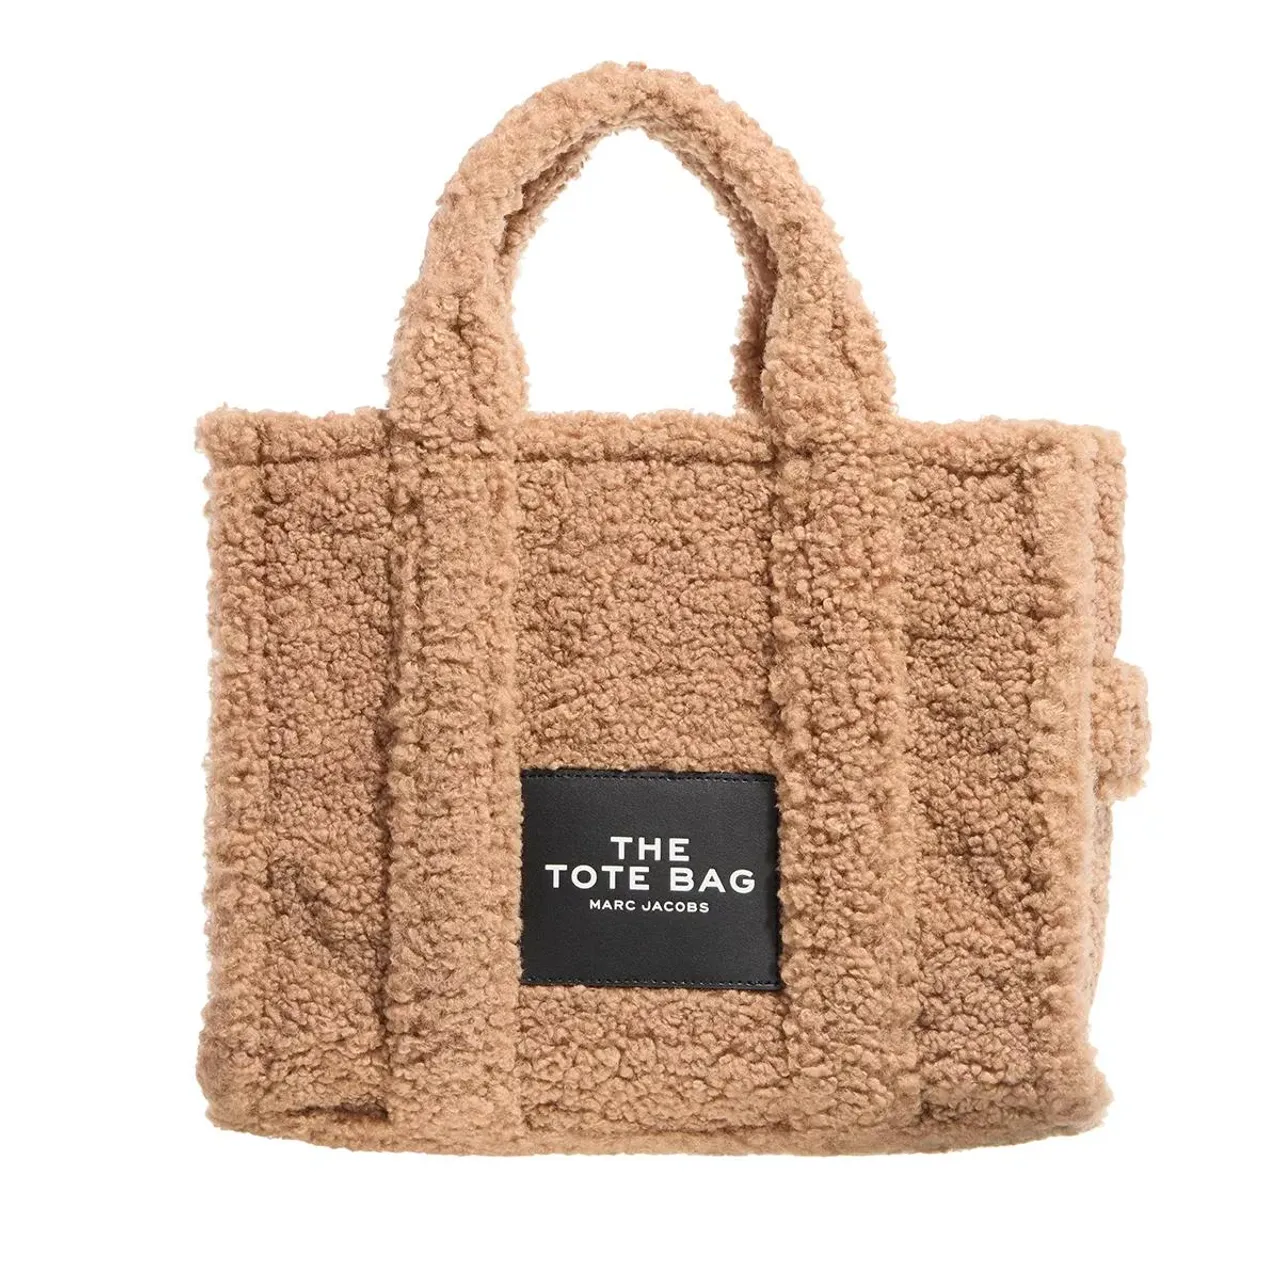 Marc Jacobs Tote Bags - The Teddy Small Traveller Tote Bag - brown - Tote Bags for ladies